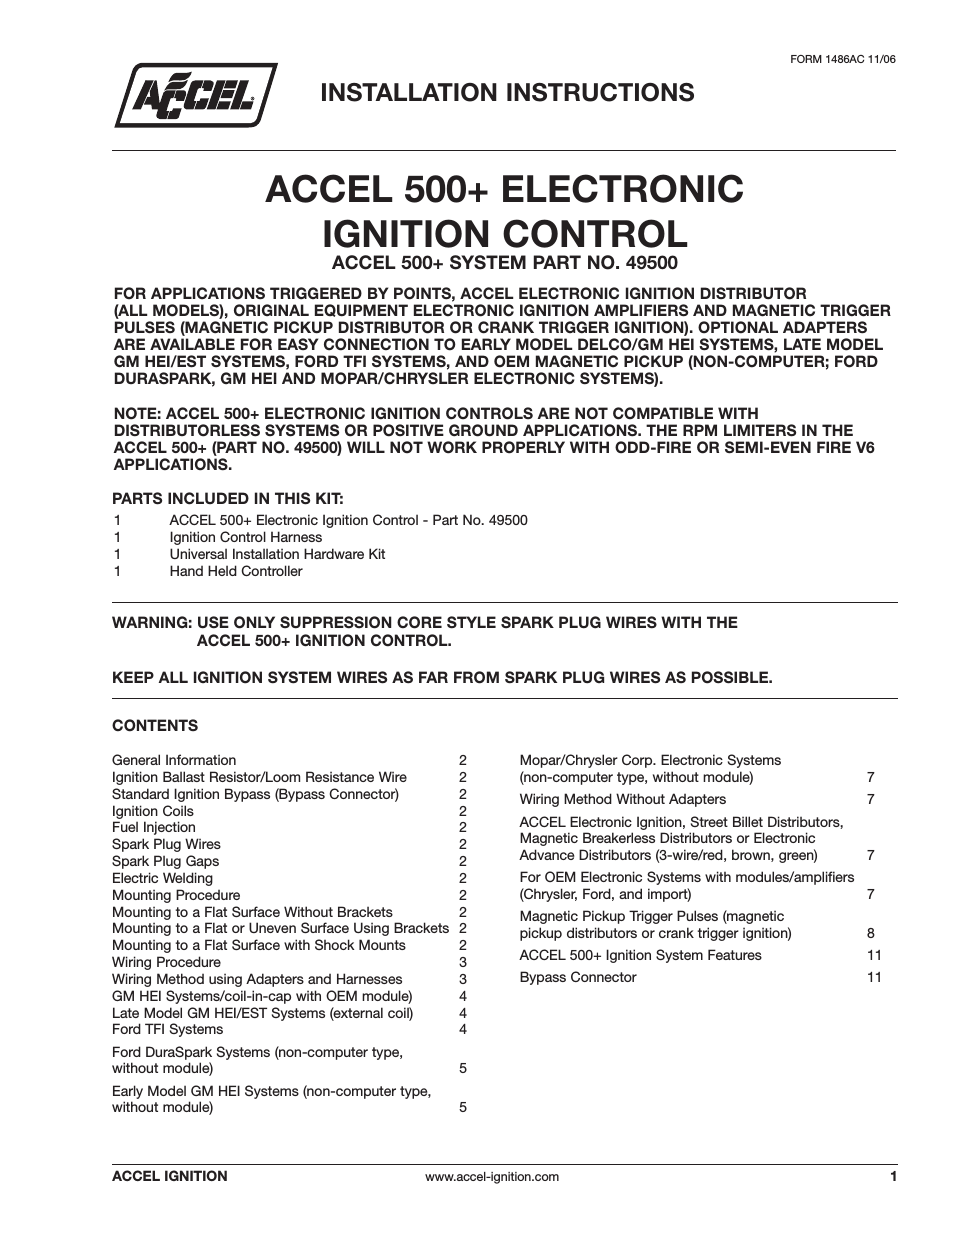 ACCEL 500+ ELECTRONIC IGNITION CONTROL 49500